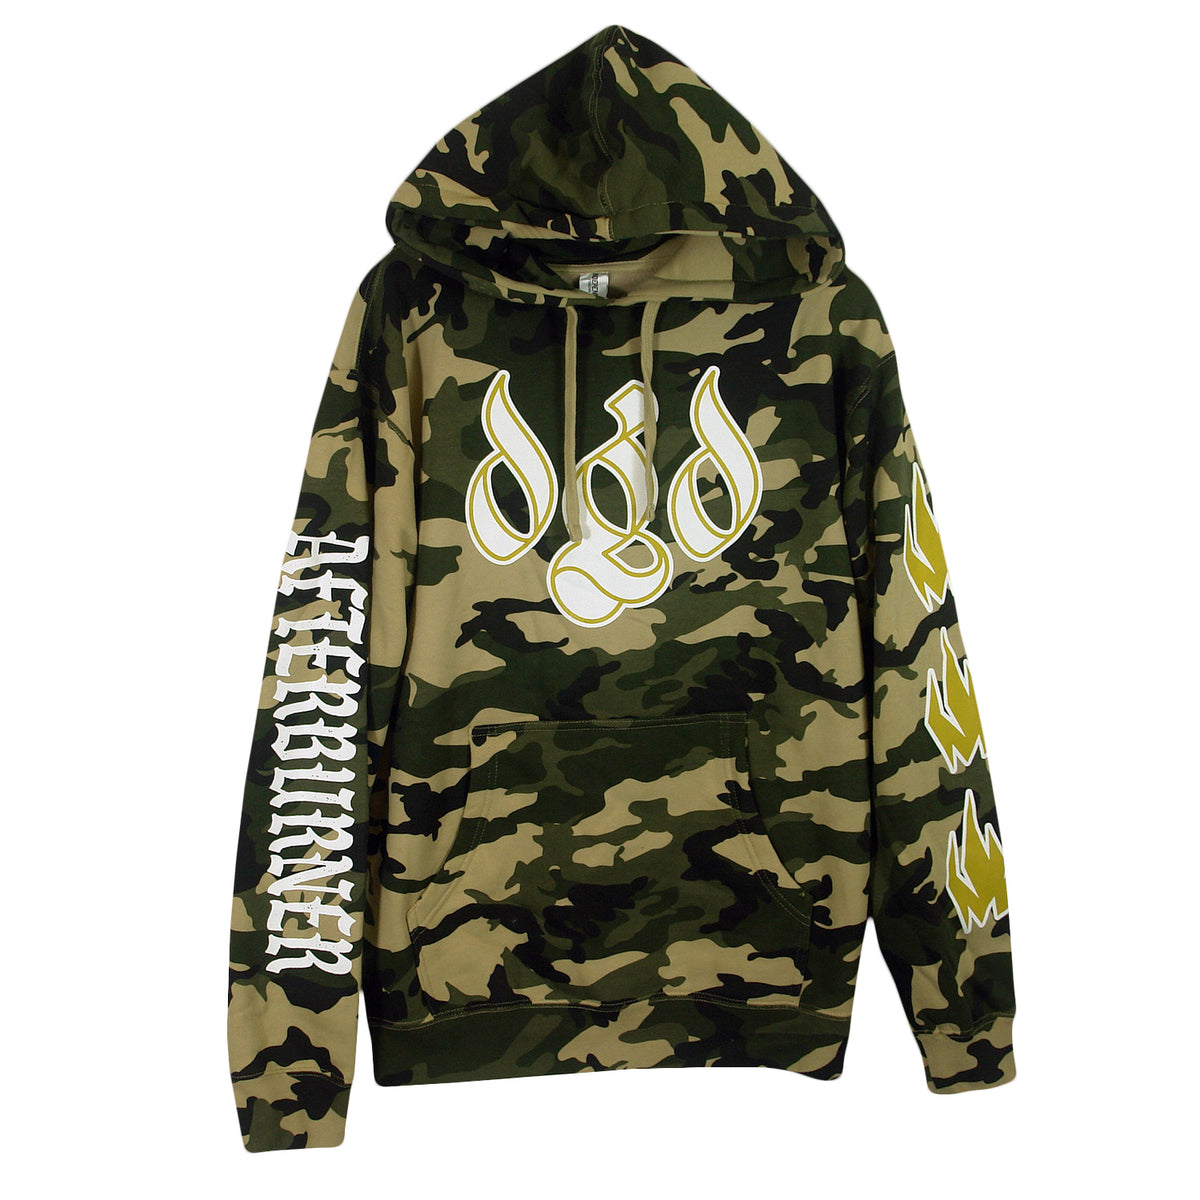 image of the front of a camo pullover hoodie on a white background. hoodie has a center chest print in white of the letters D G D. left sleeve has white print that says afterburner., and the yellow flames on the right sleeve.